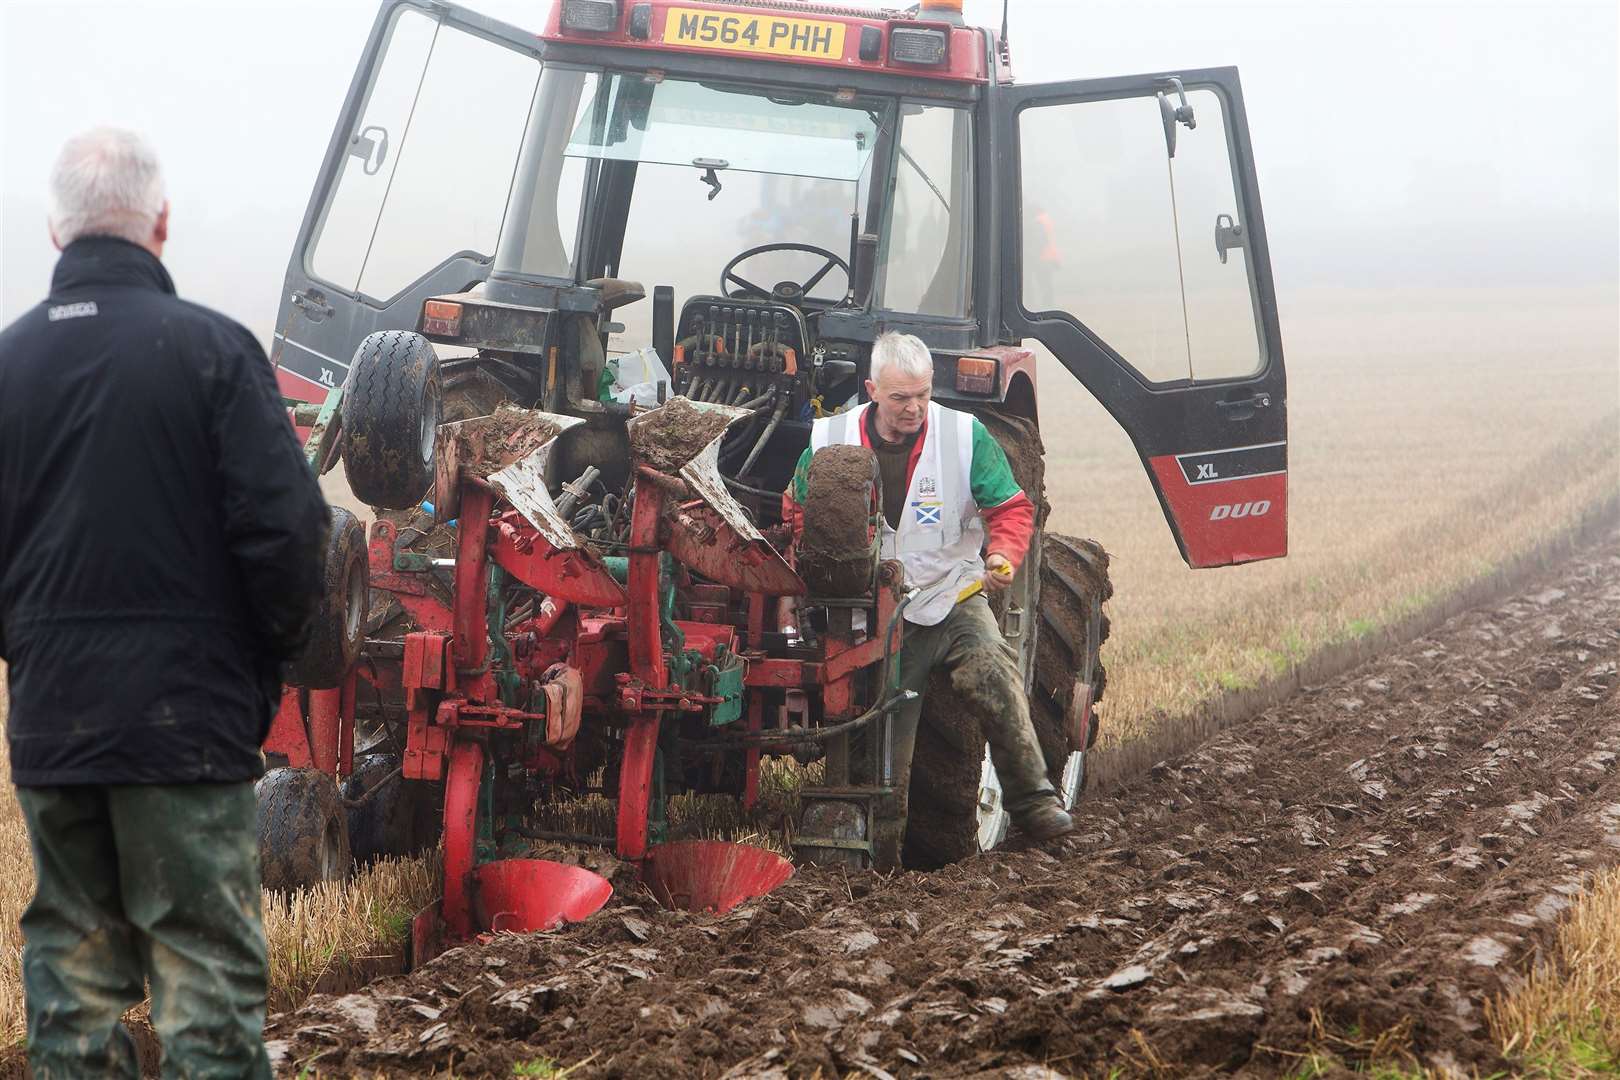 James Tait, Thurso, was competing in the reversible ploughing section. Photo: Robert MacDonald/Northern Studios